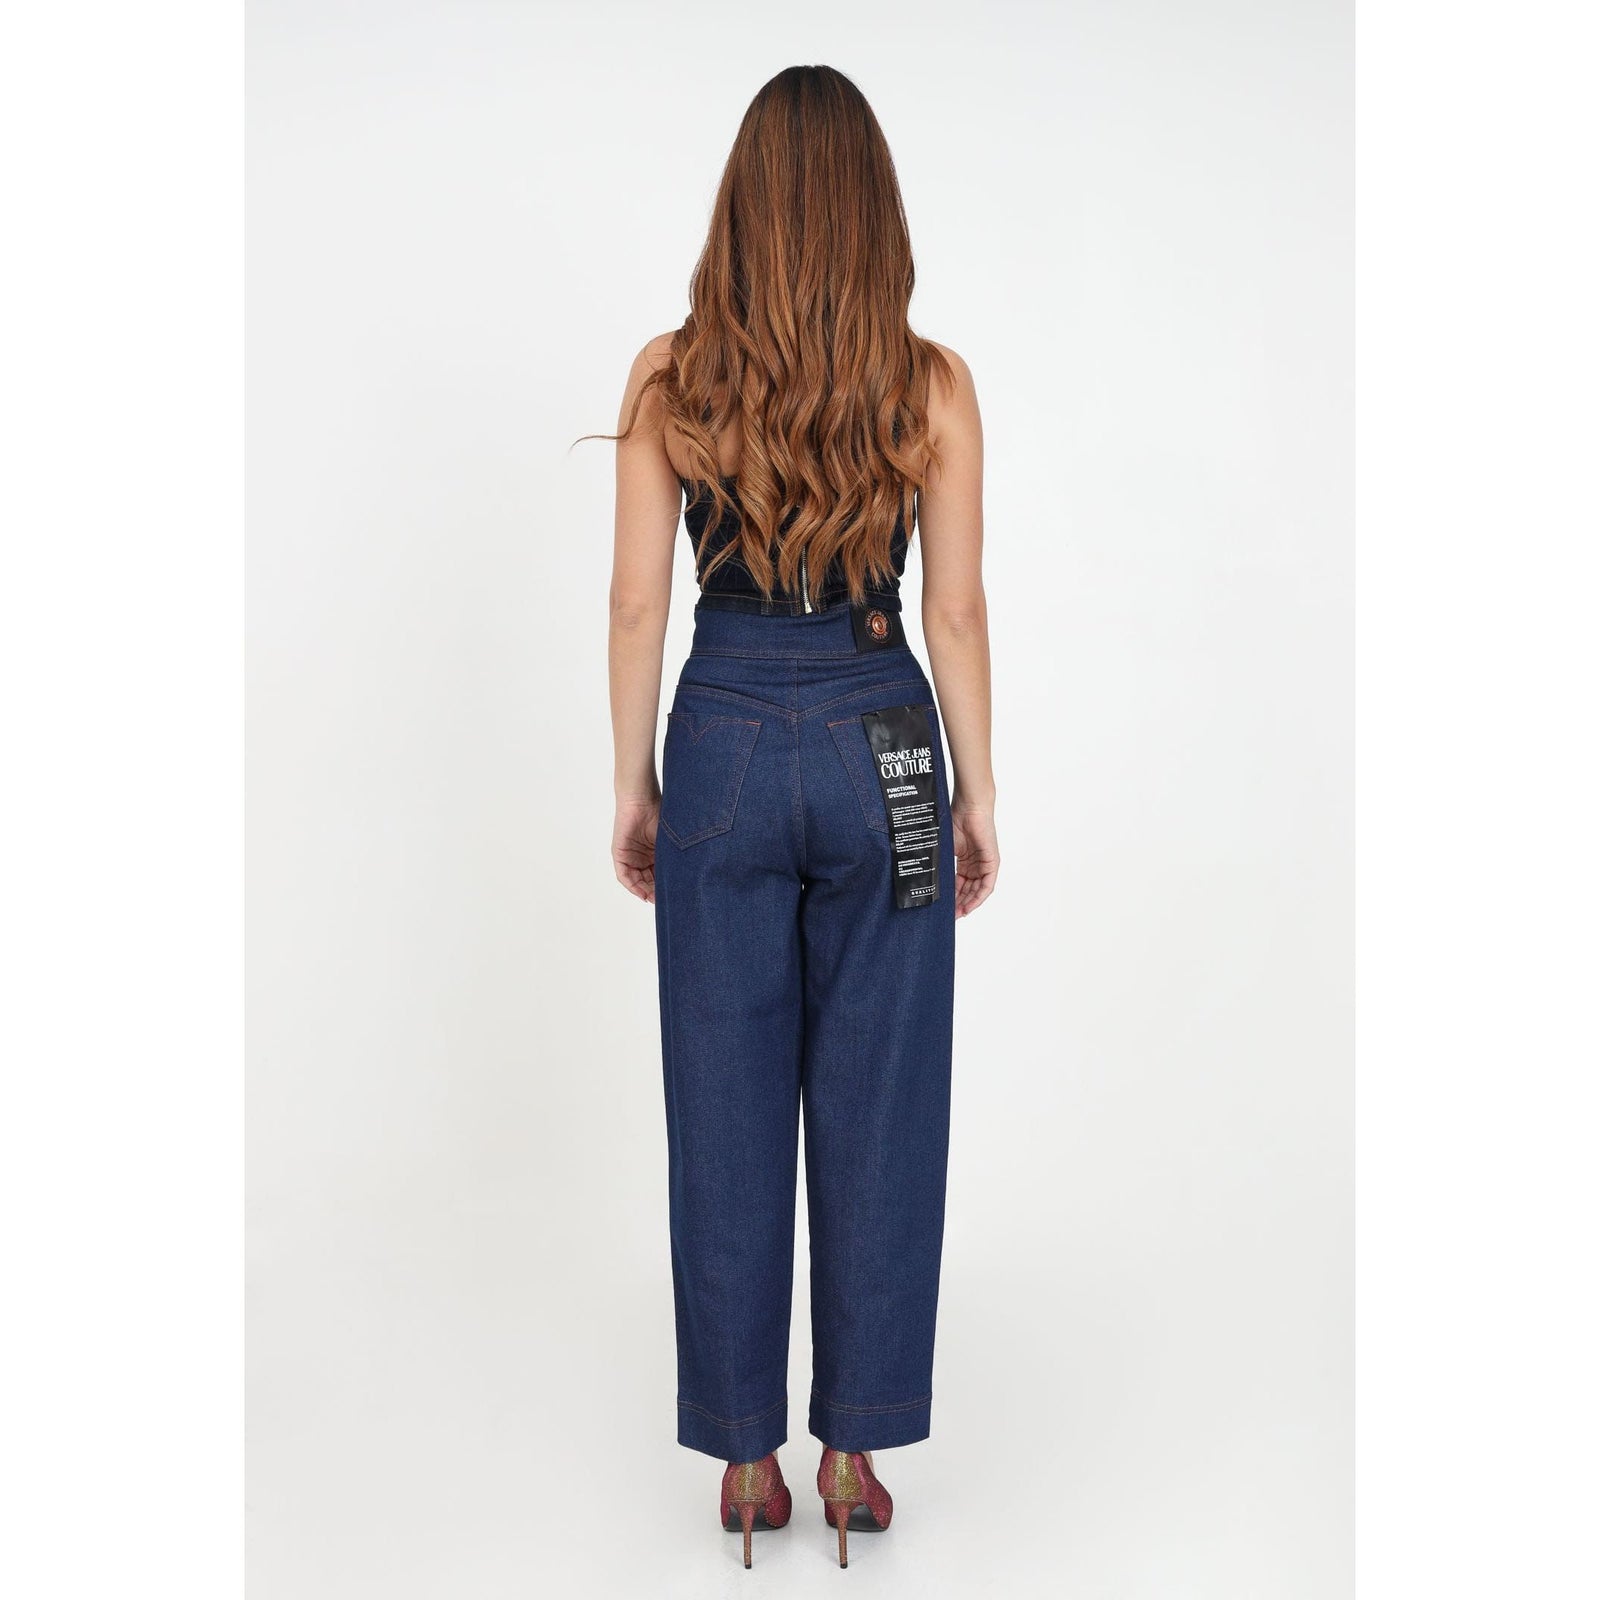 VERSACE JEANS COUTURE HIGH WAISTED DARK DENIM JEANS - Yooto